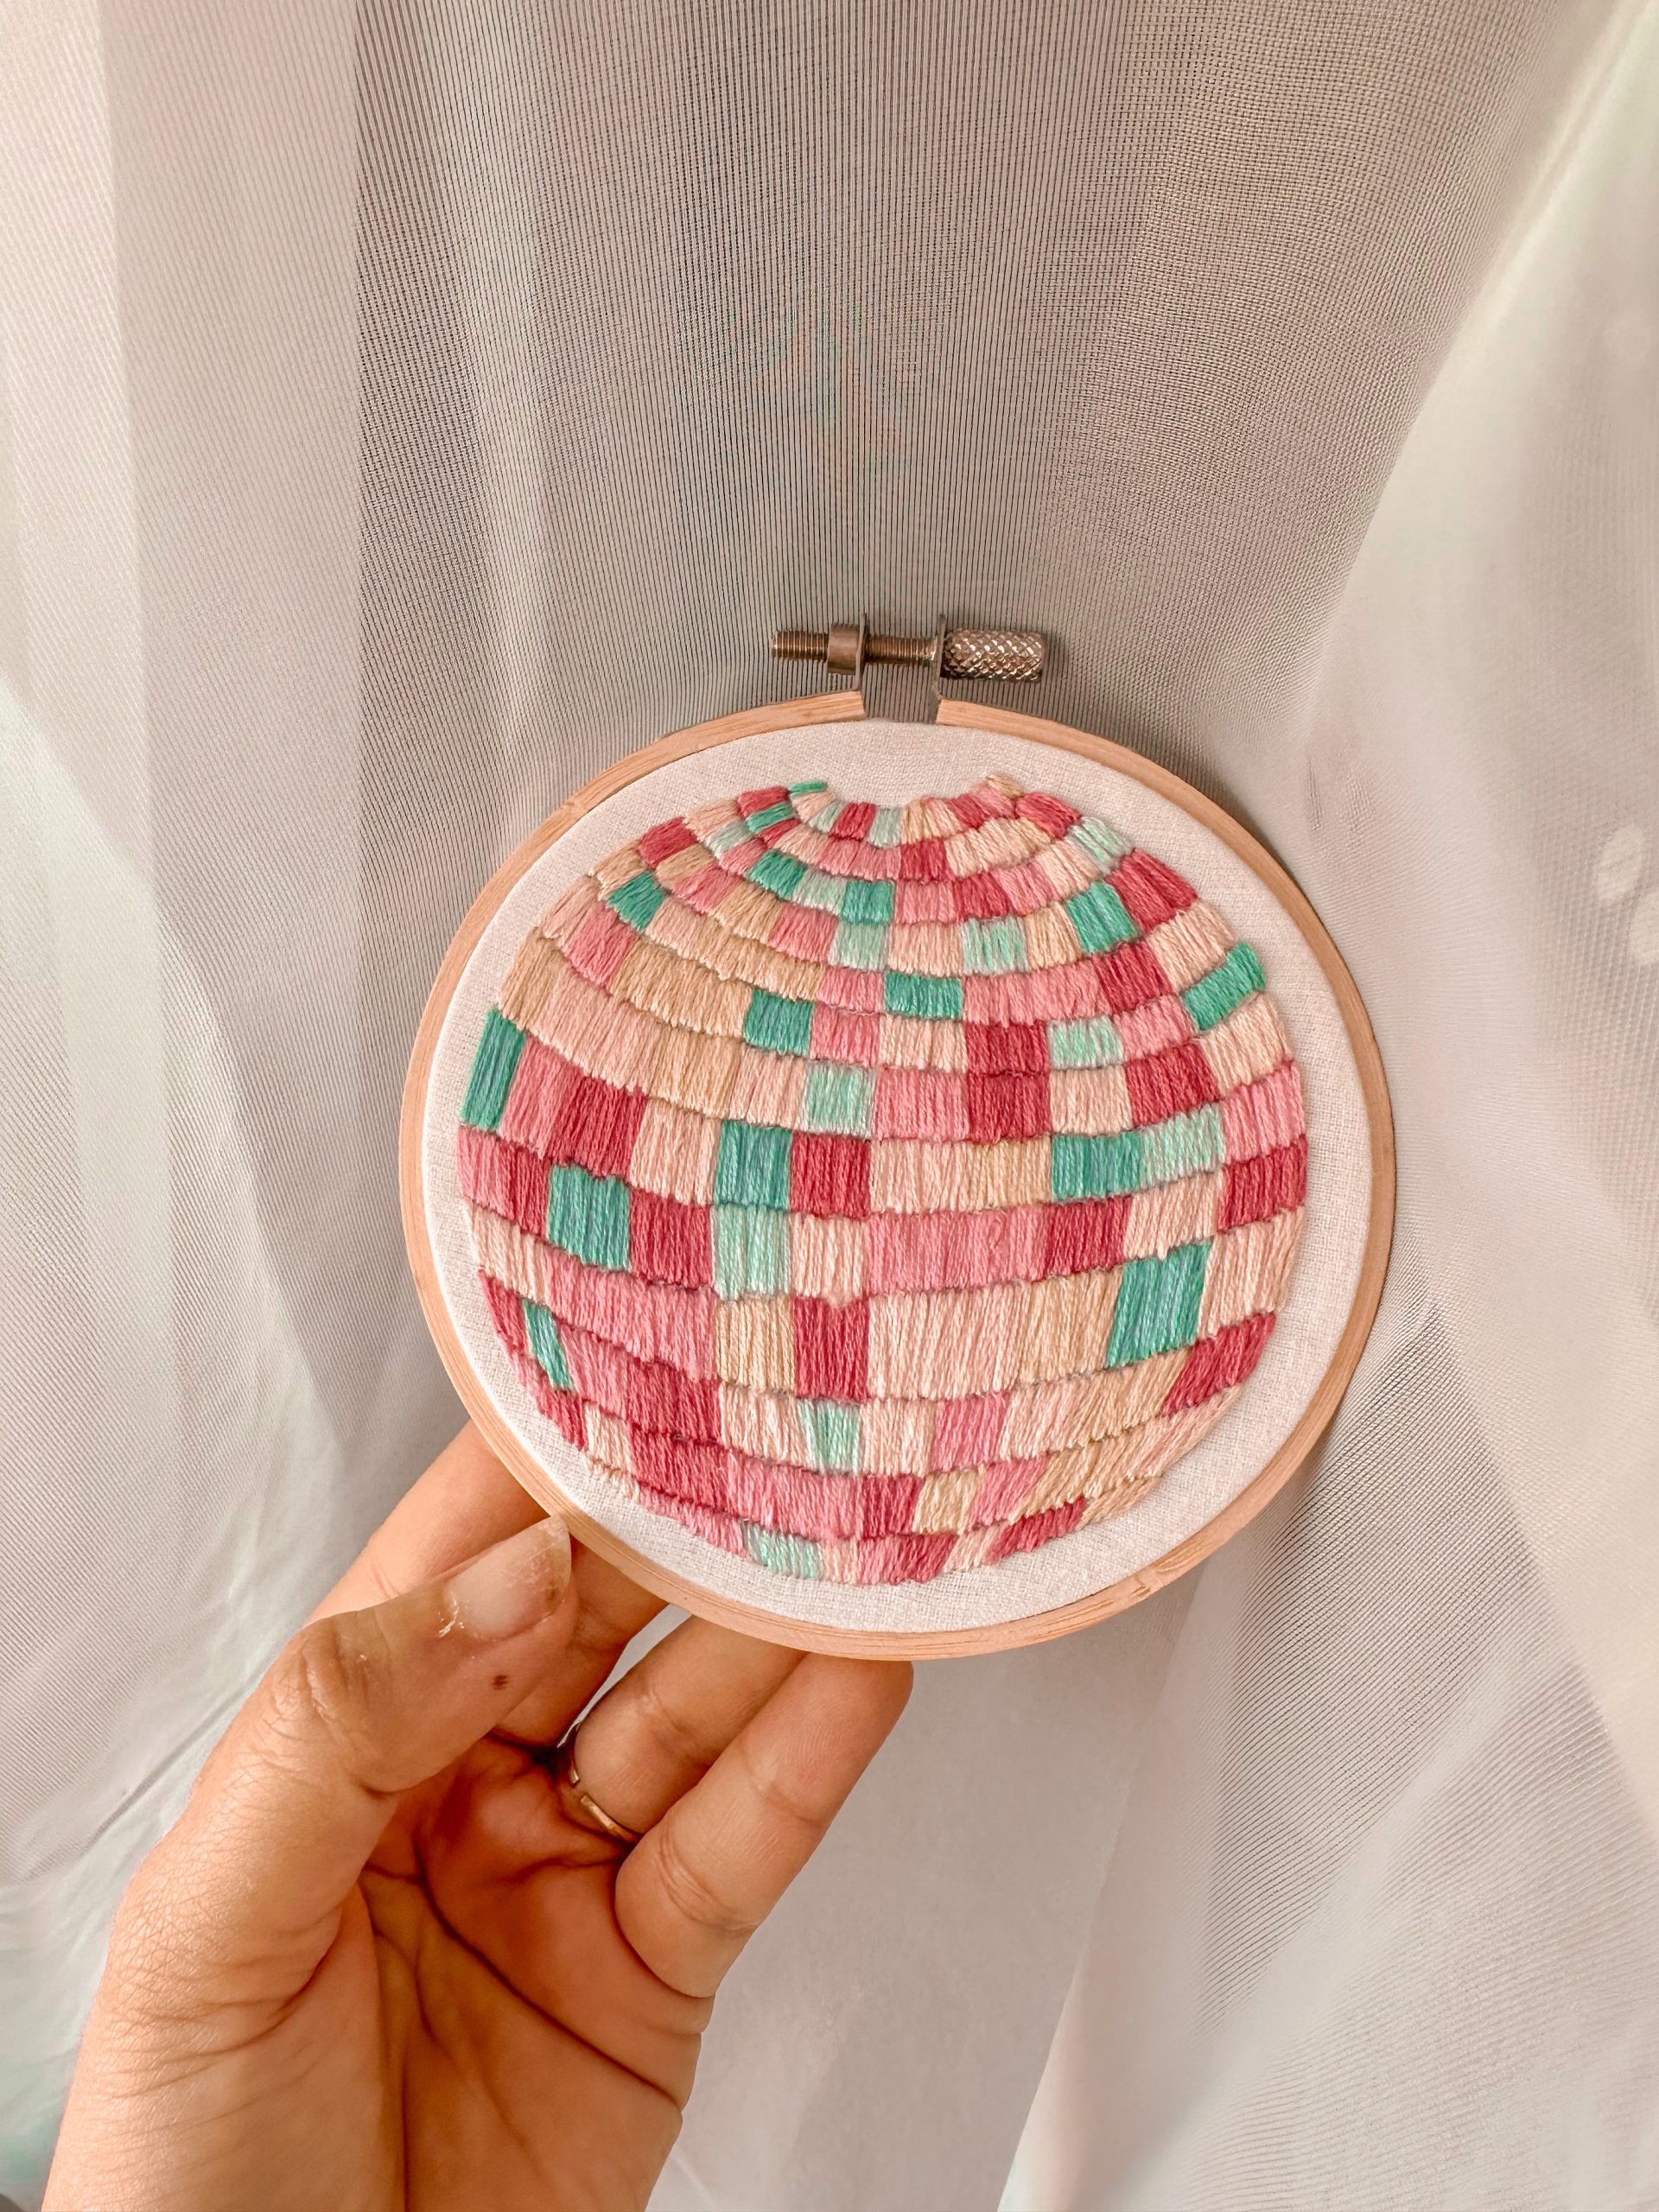 Discover the vibrant world of embroidery in our beginner-friendly workshop.